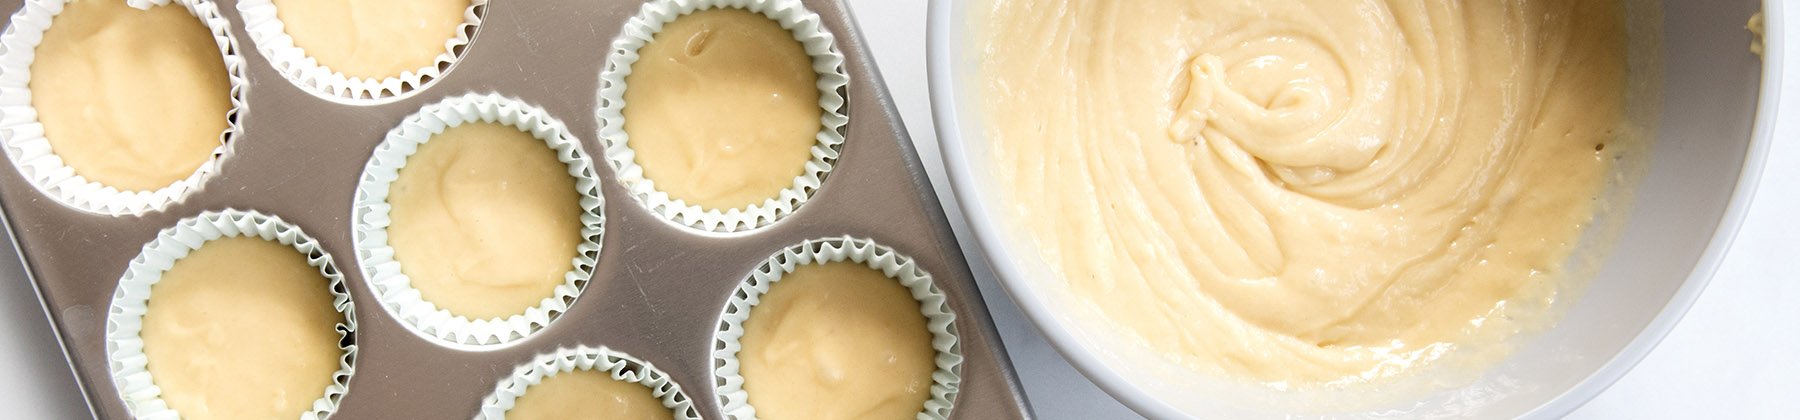 https://cdn.everythingkitchens.com/media/wysiwyg/images/Category_Headers/Cupcake-Pans-and-Muffin-Trays.jpg